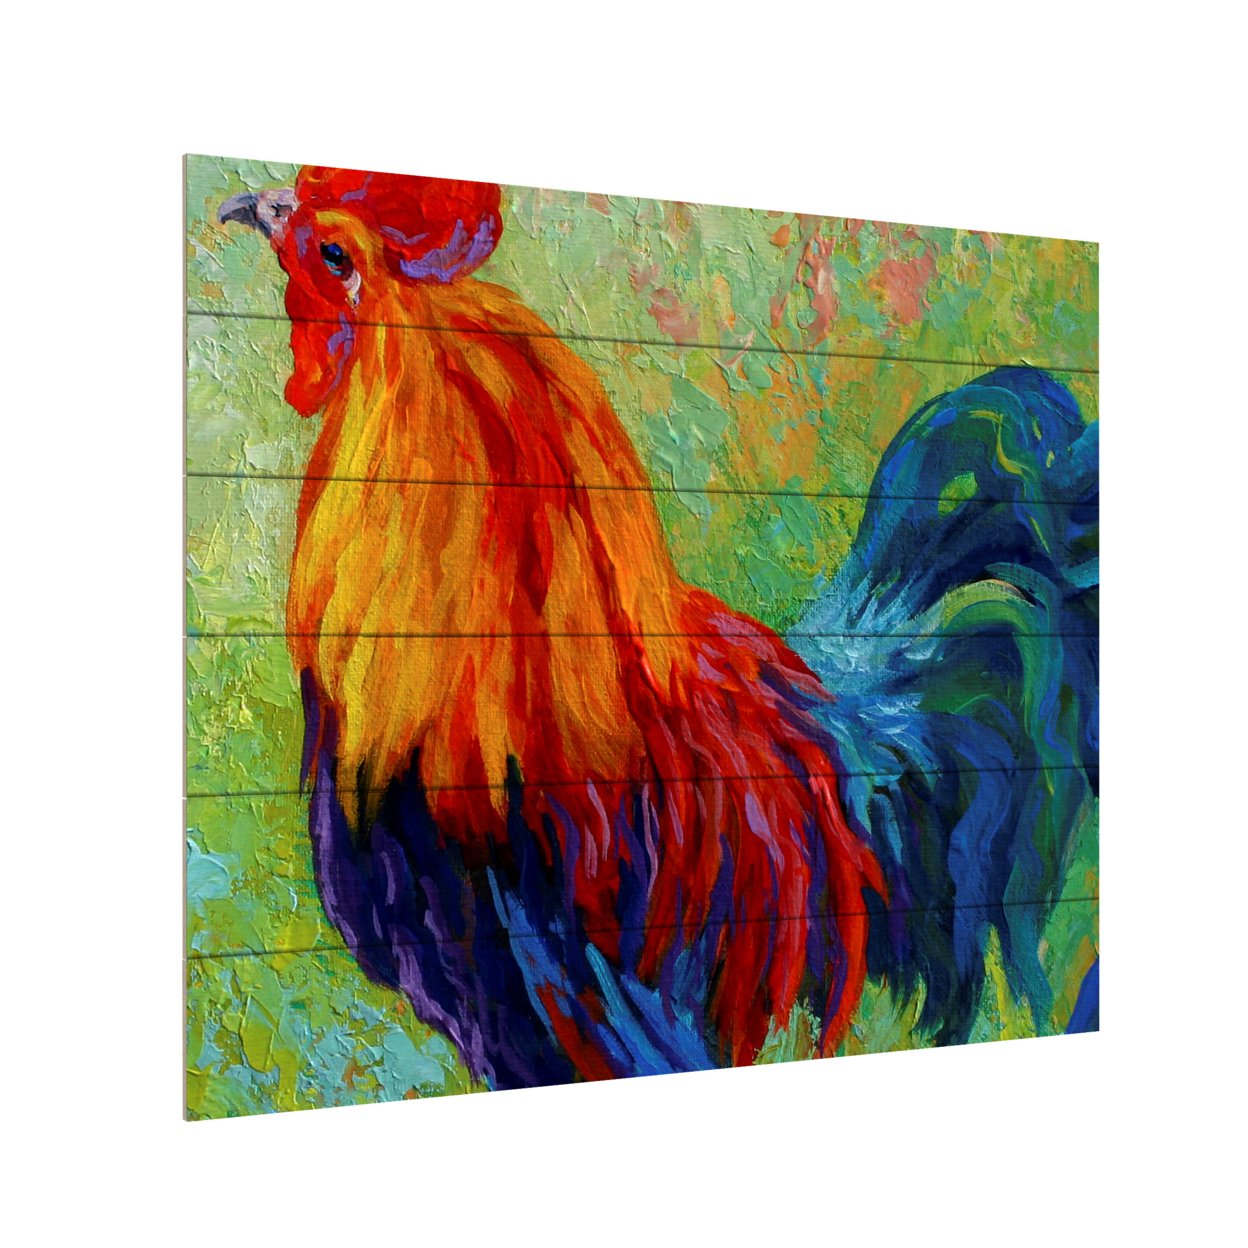 Wooden Slat Art 18 X 22 Inches Titled Band Of Gold Rooster Ready To Hang Home Decor Picture